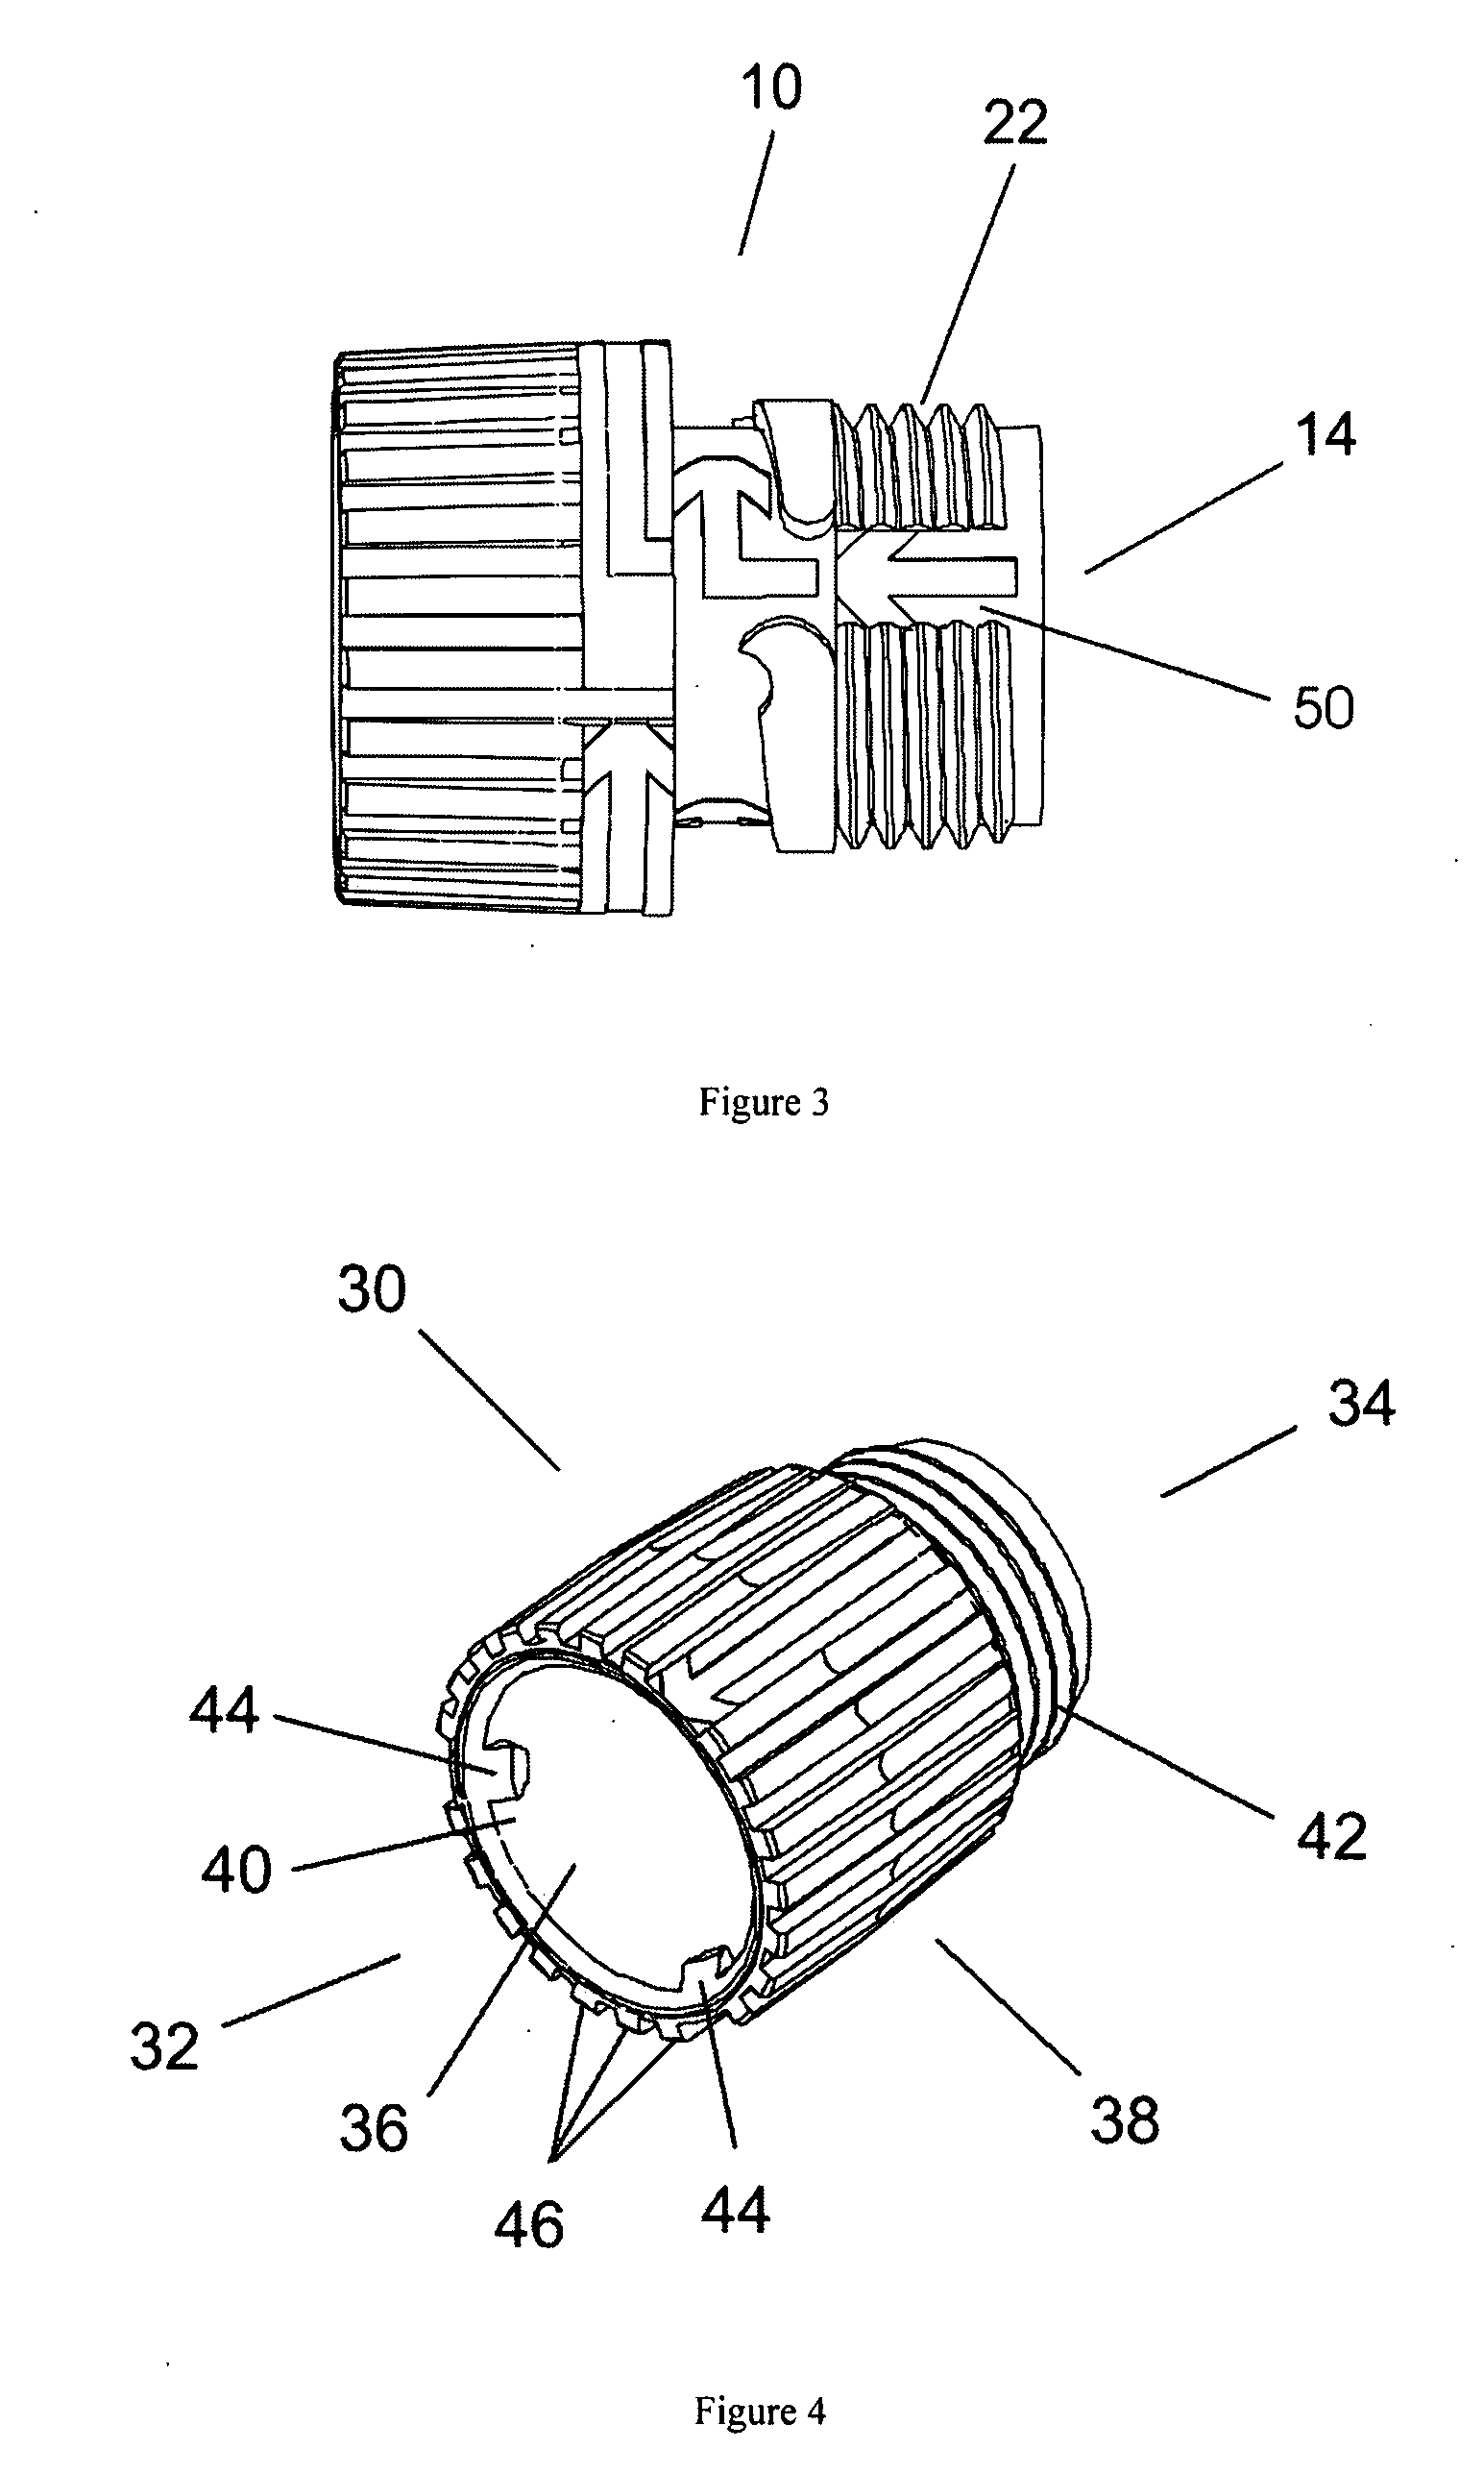 Dual-mode connection device